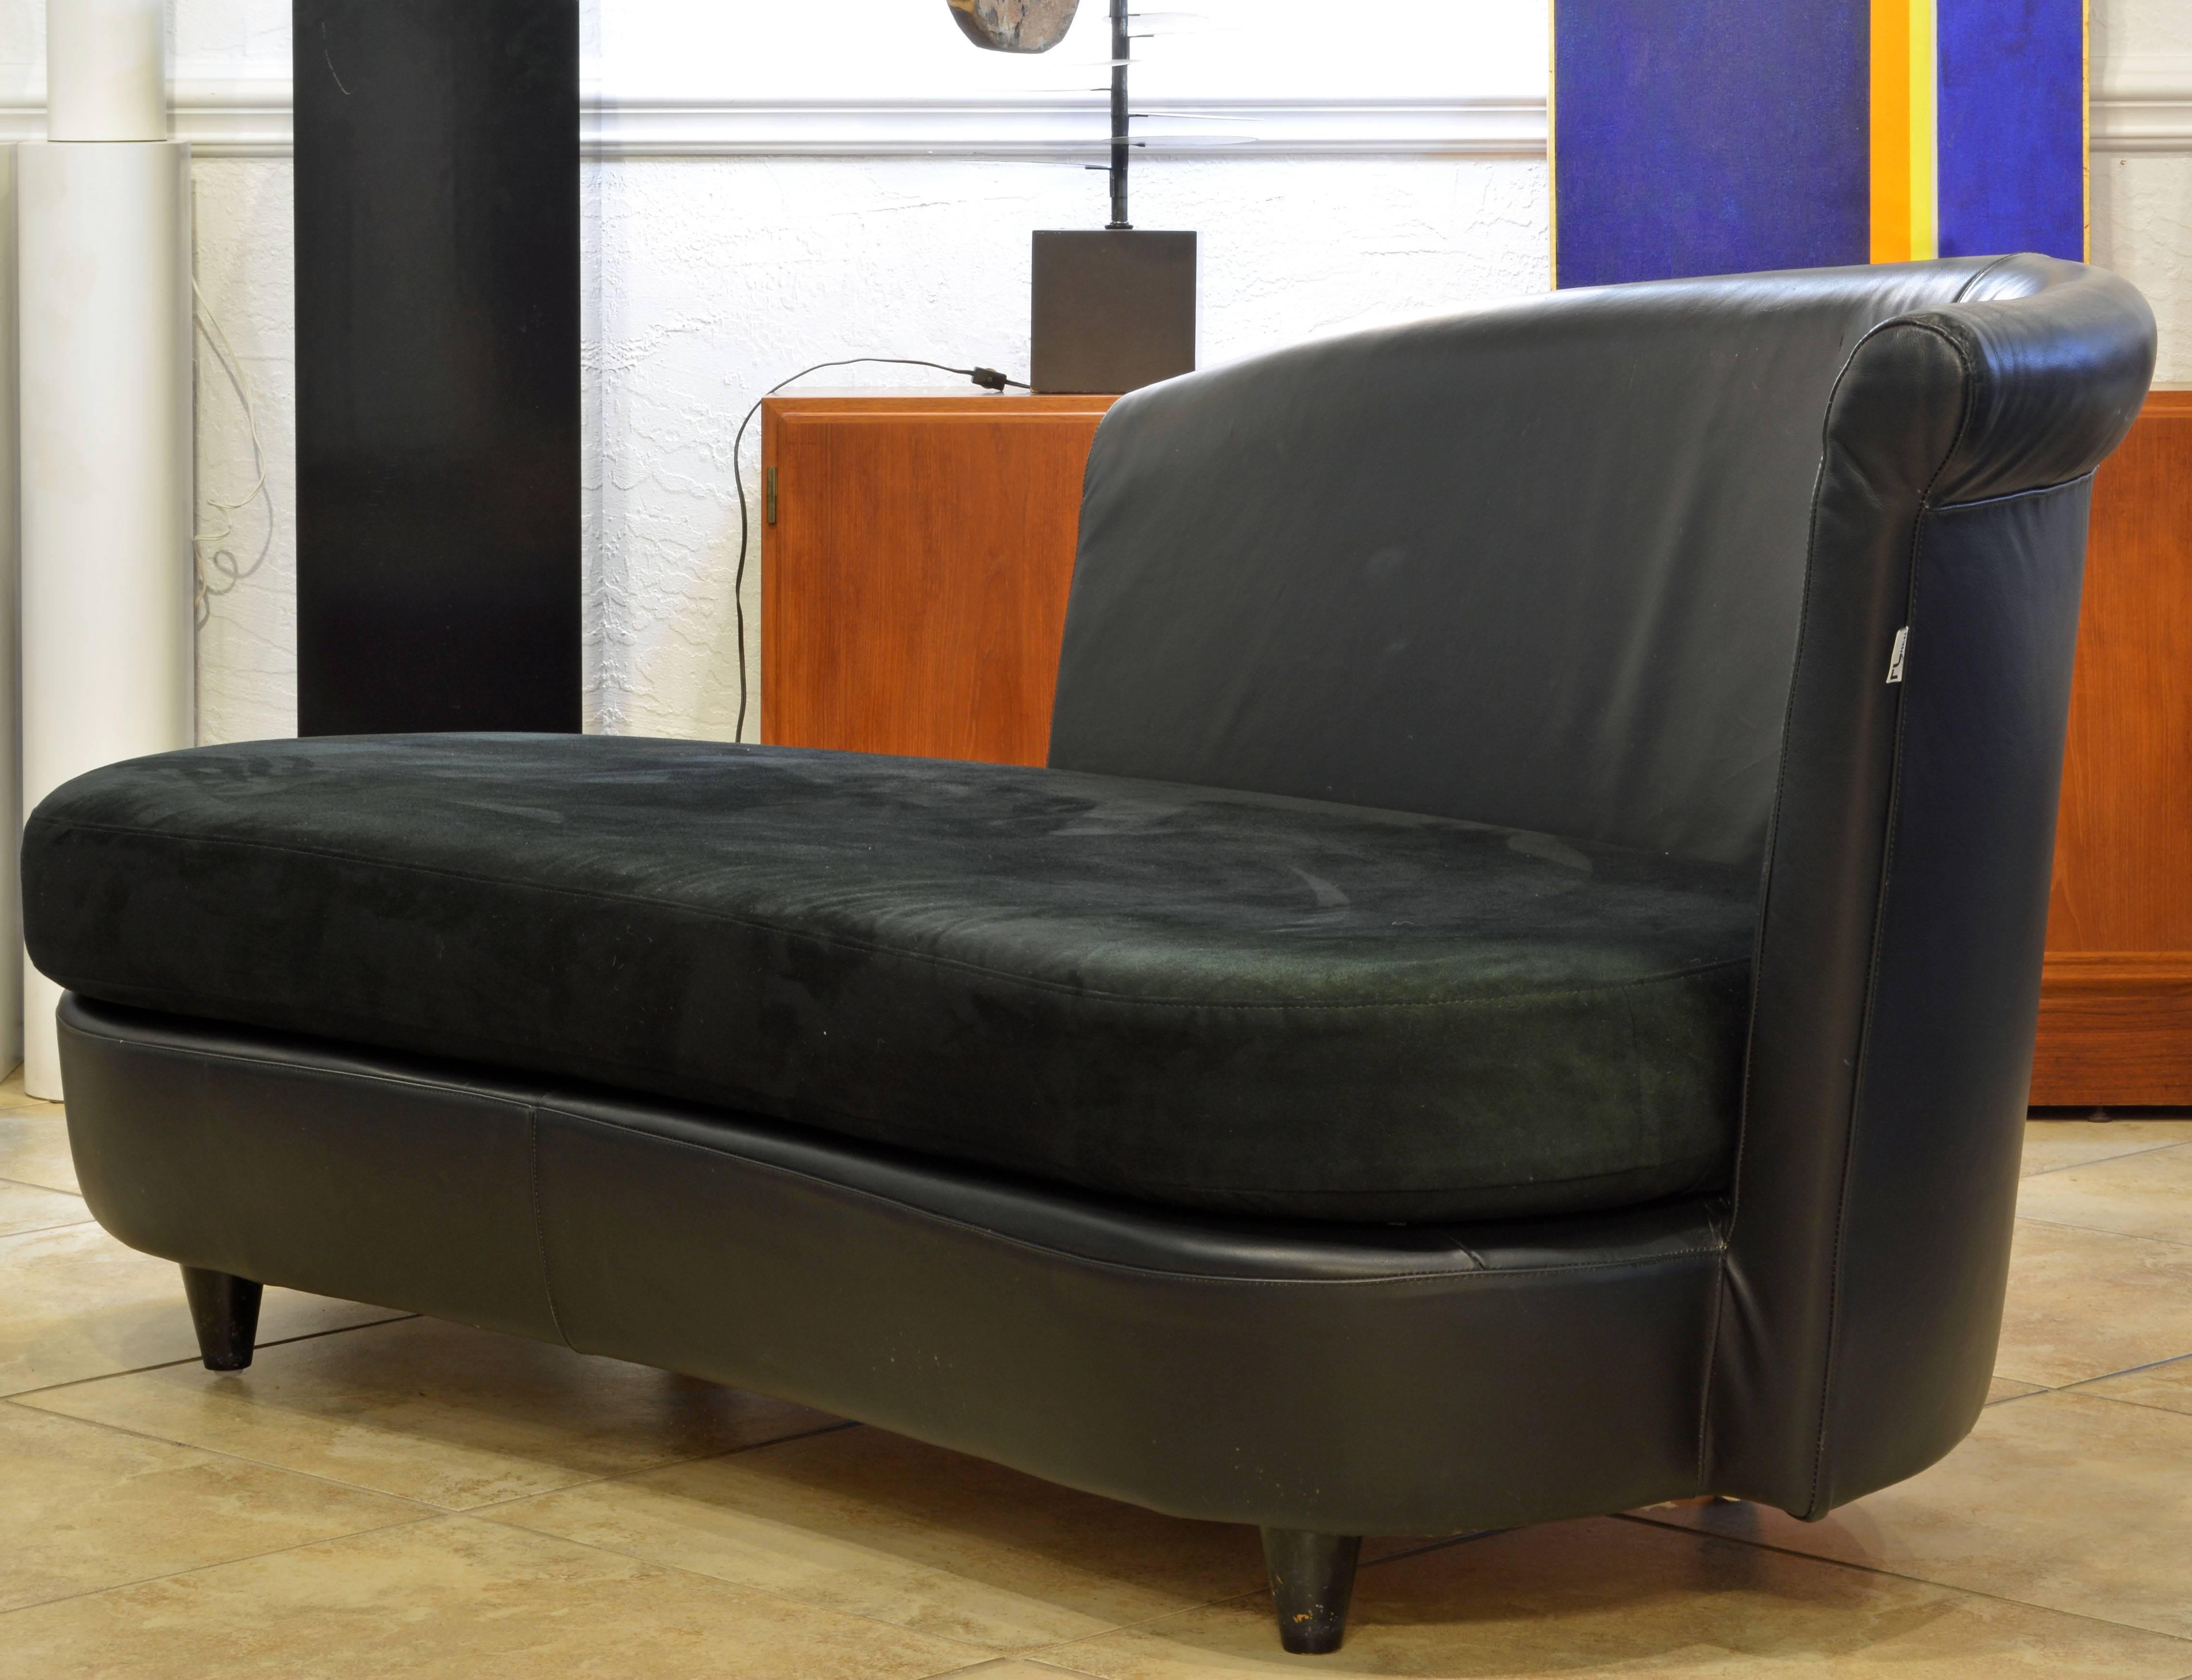 This sofa is an early example of Ferlea's change of style in the 1980s under the direction of Milvo Benini. It is inspired by the Art Deco style. The back and the base are covered in black leather and the cushion in a black suede like material